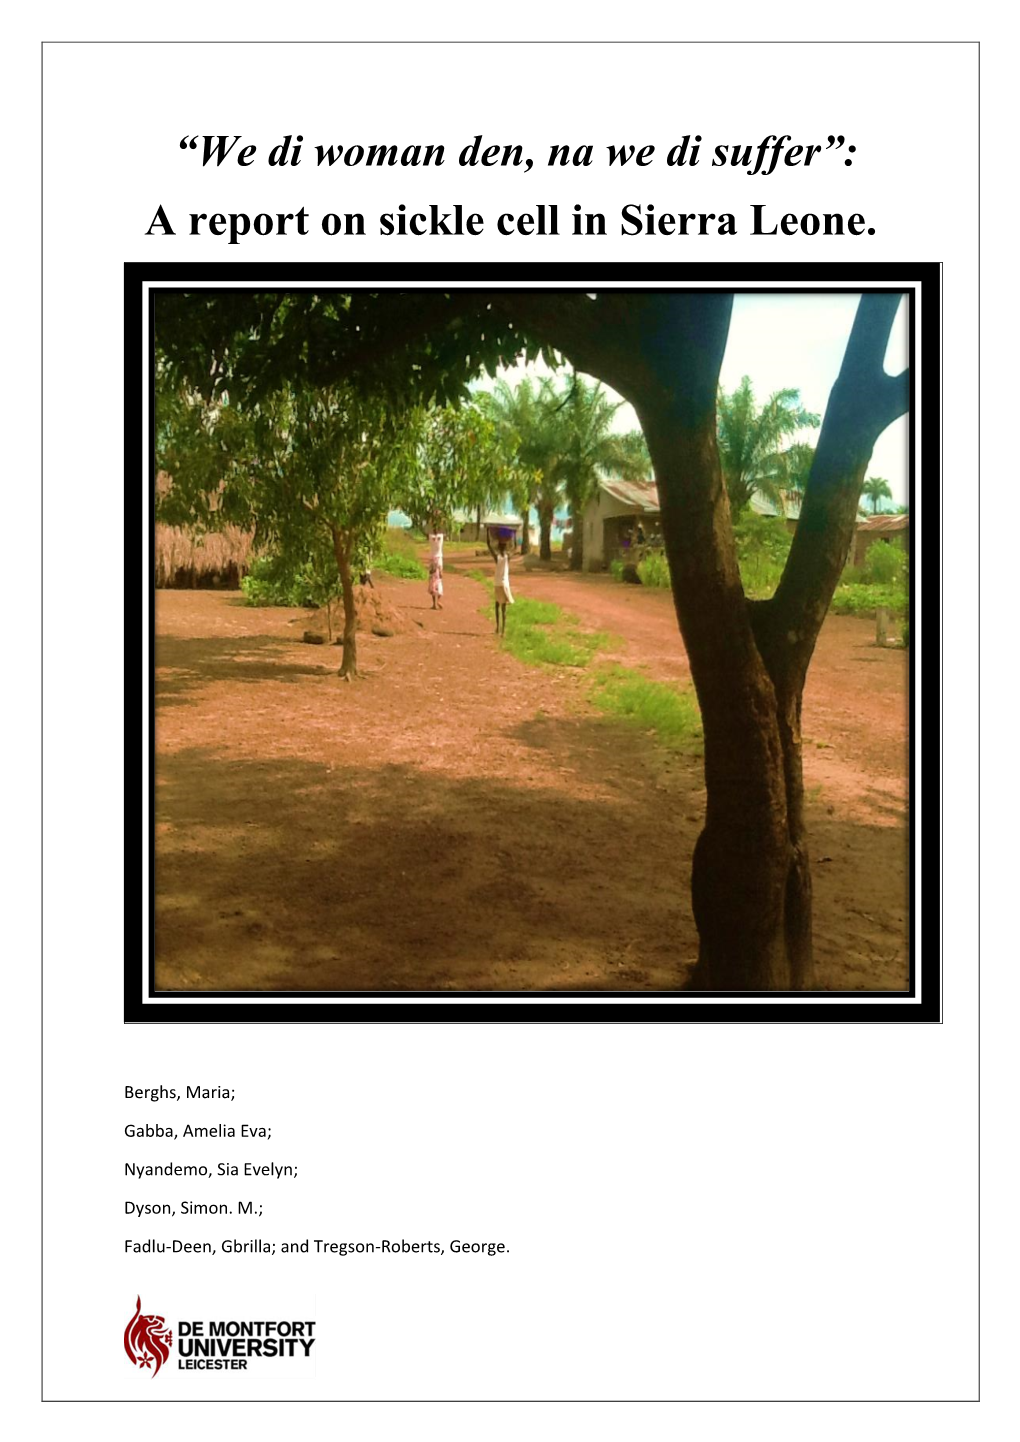 A Report on Sickle Cell in Sierra Leone